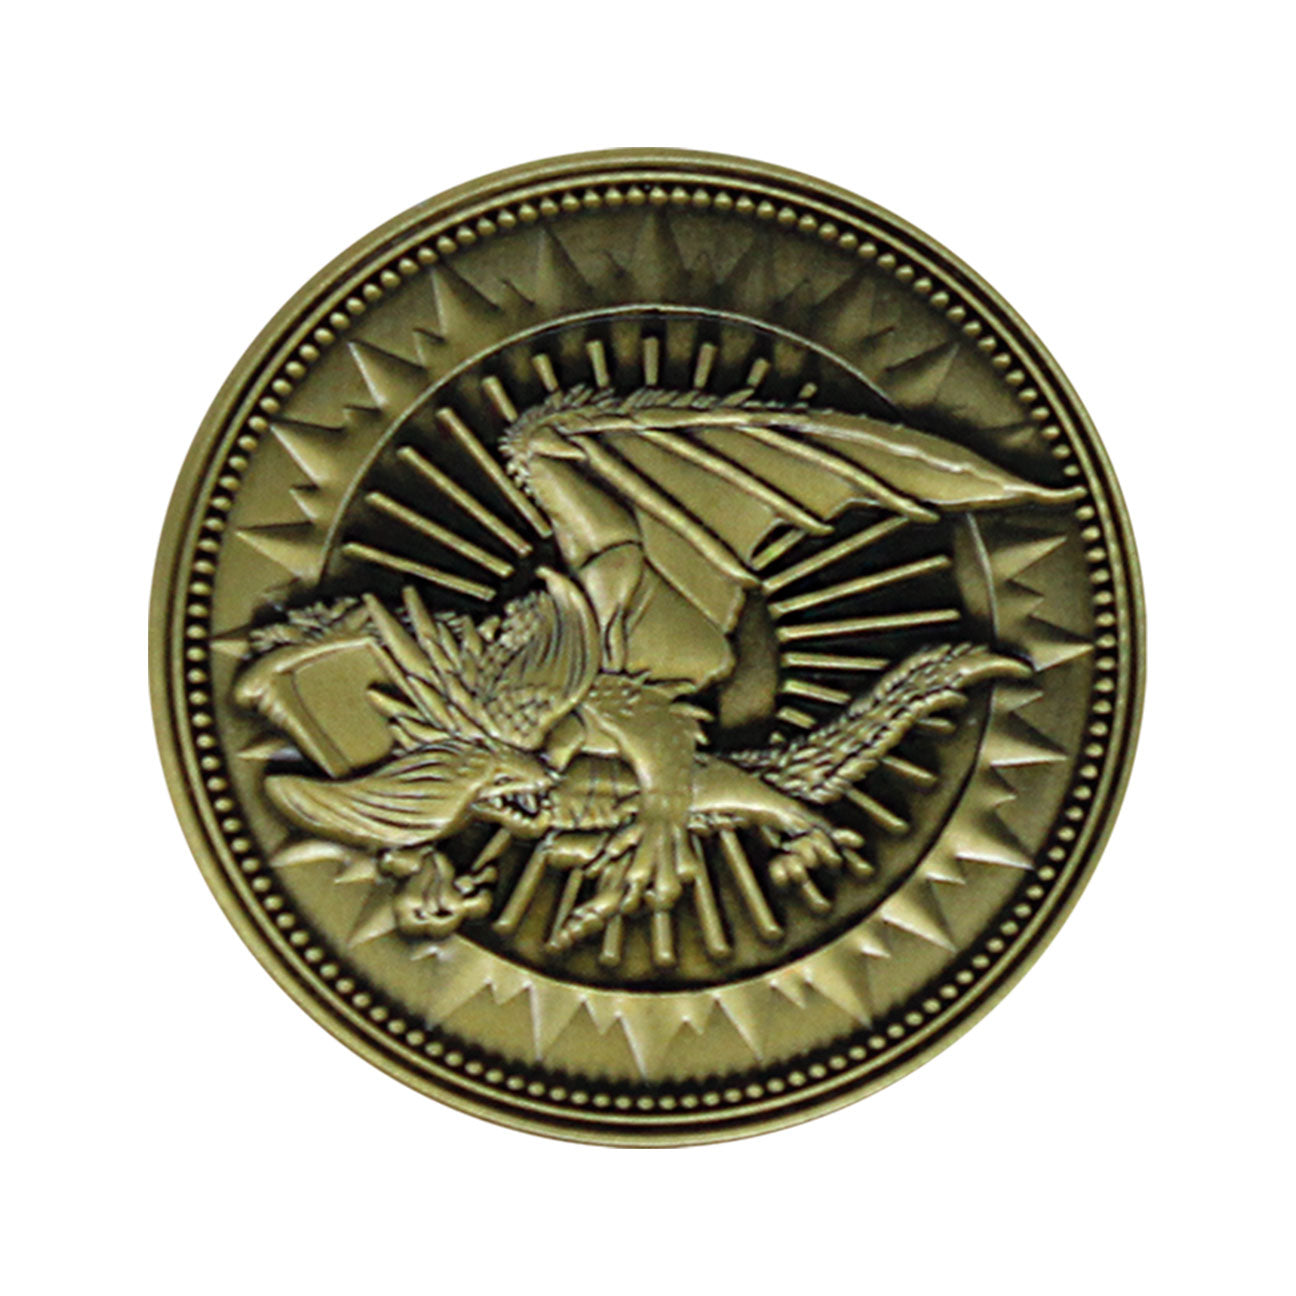 Monster Hunter Limited Edition Collectible Coin